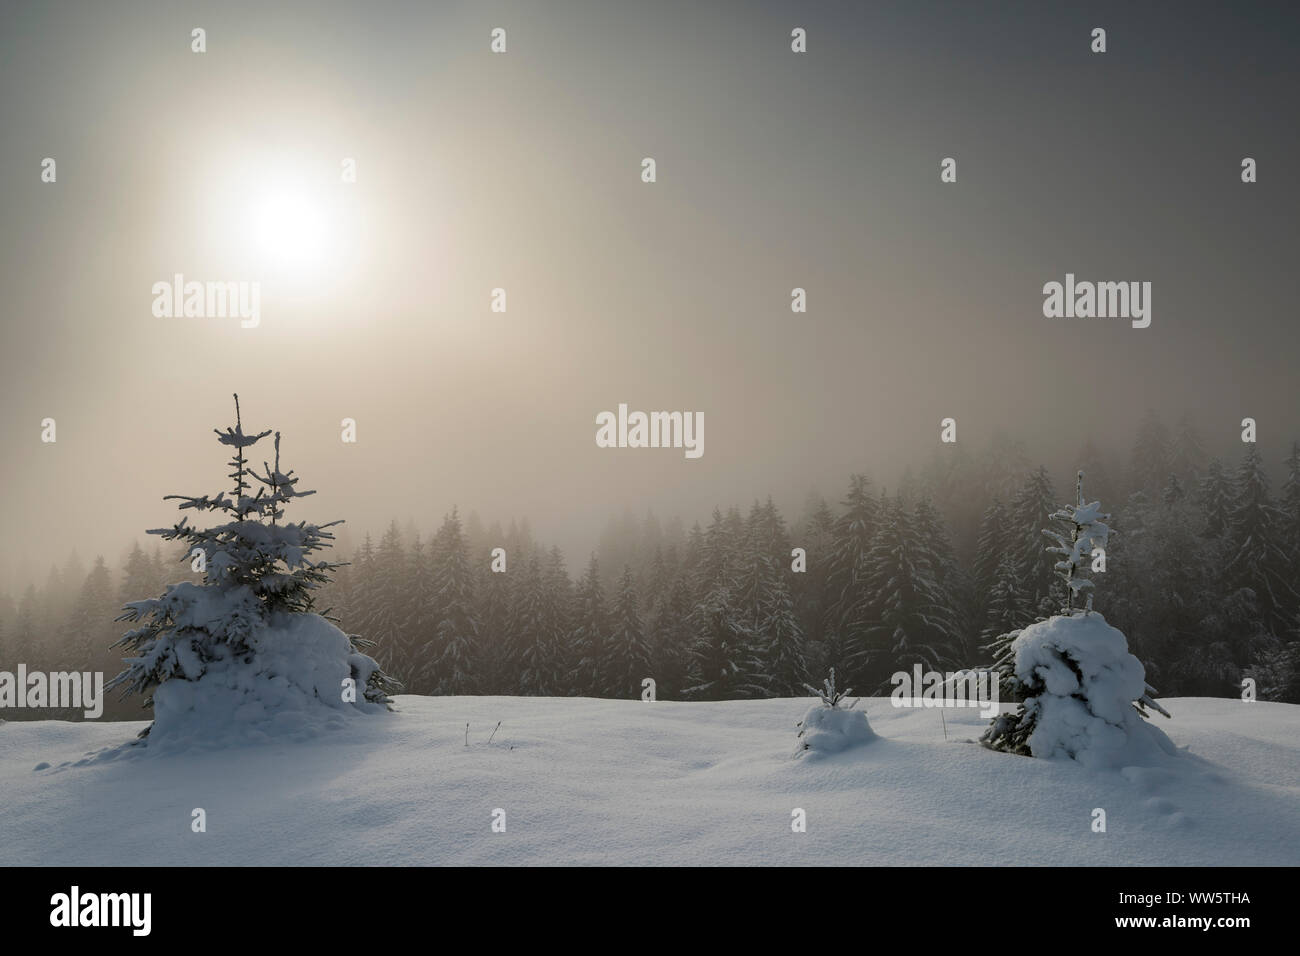 Foggy sunrise in wintry alpine rolling landscape. In the foreground trees, in the background snow-covered coniferous forest and the sun rising in the fog. Stock Photo